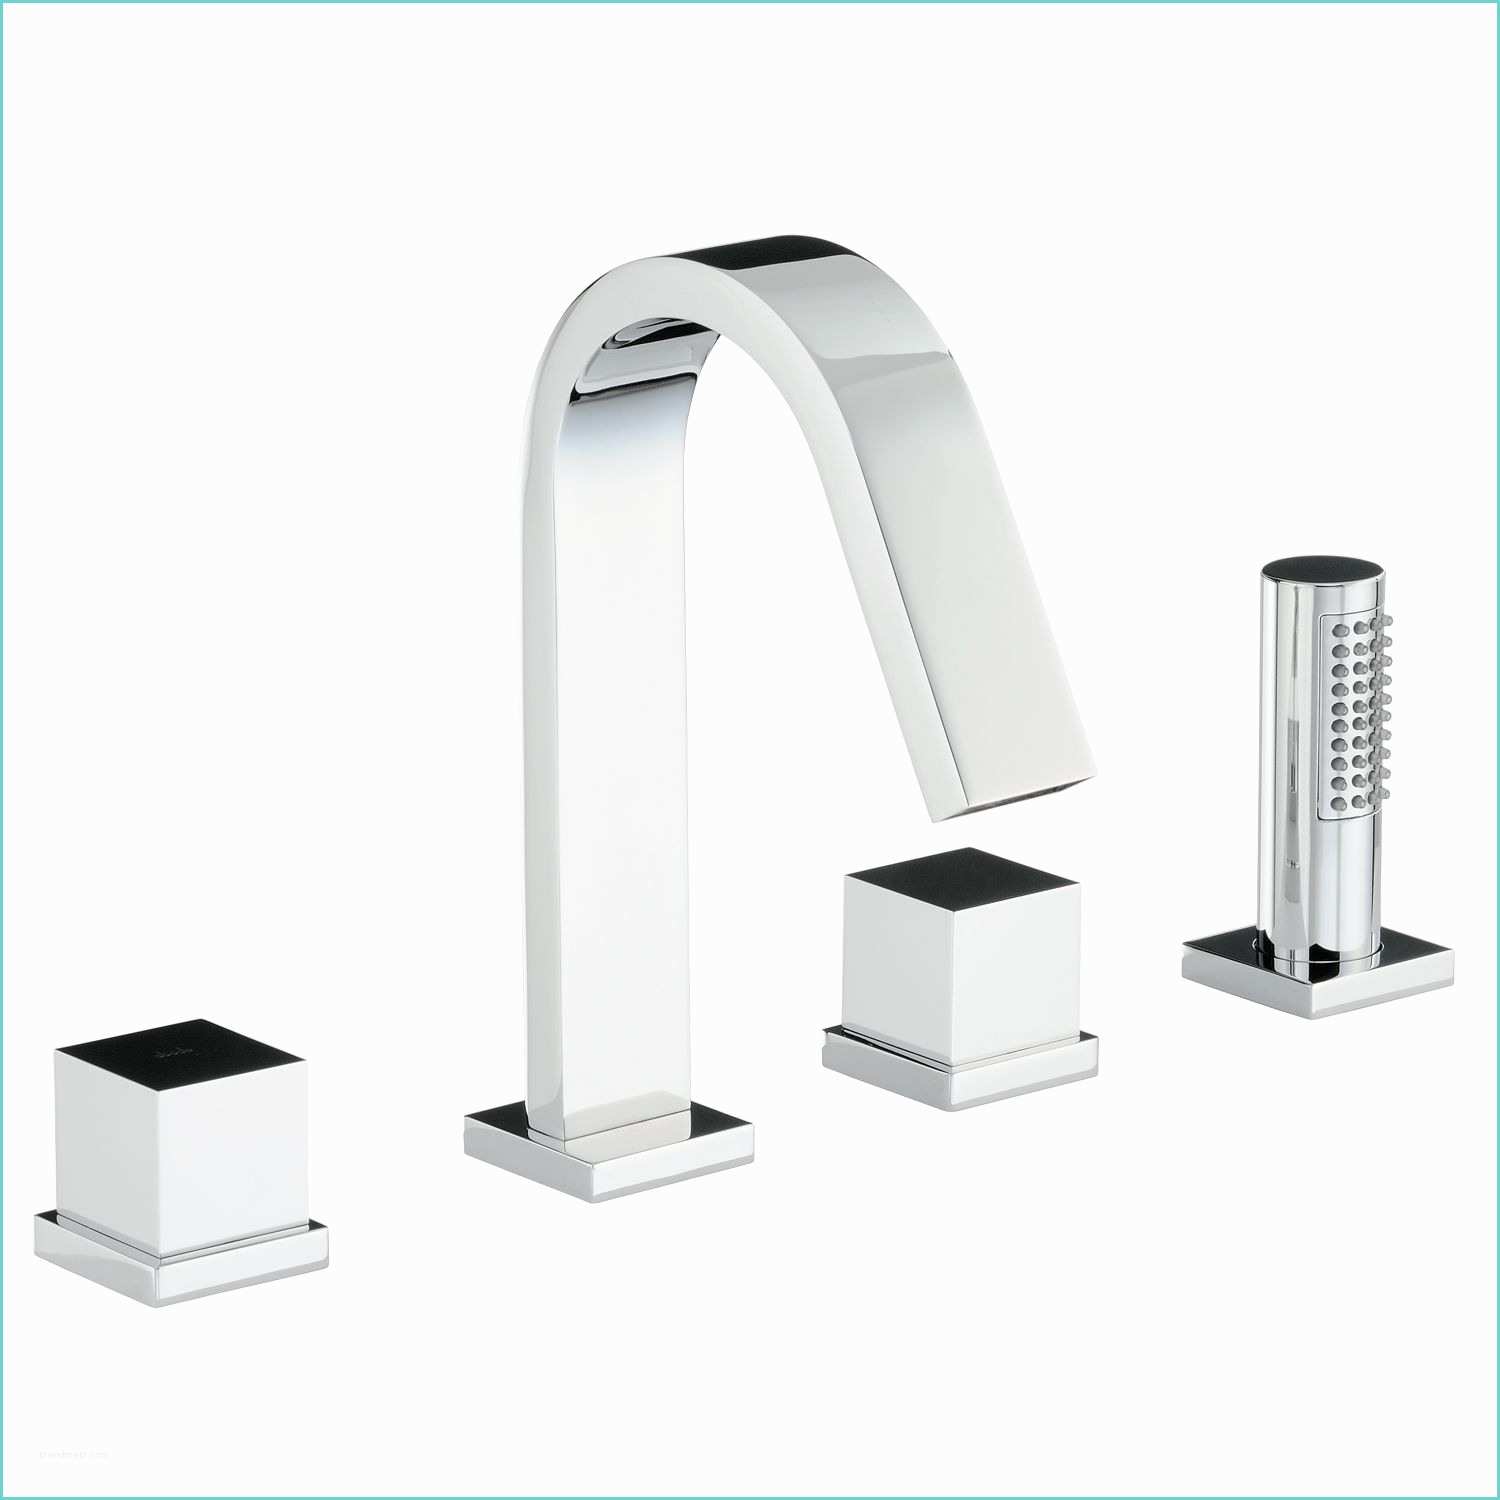 Thermostatic Shower Mixer Taps Abode Zeal Deck Mount 4 Hole Mixer Sinks Taps